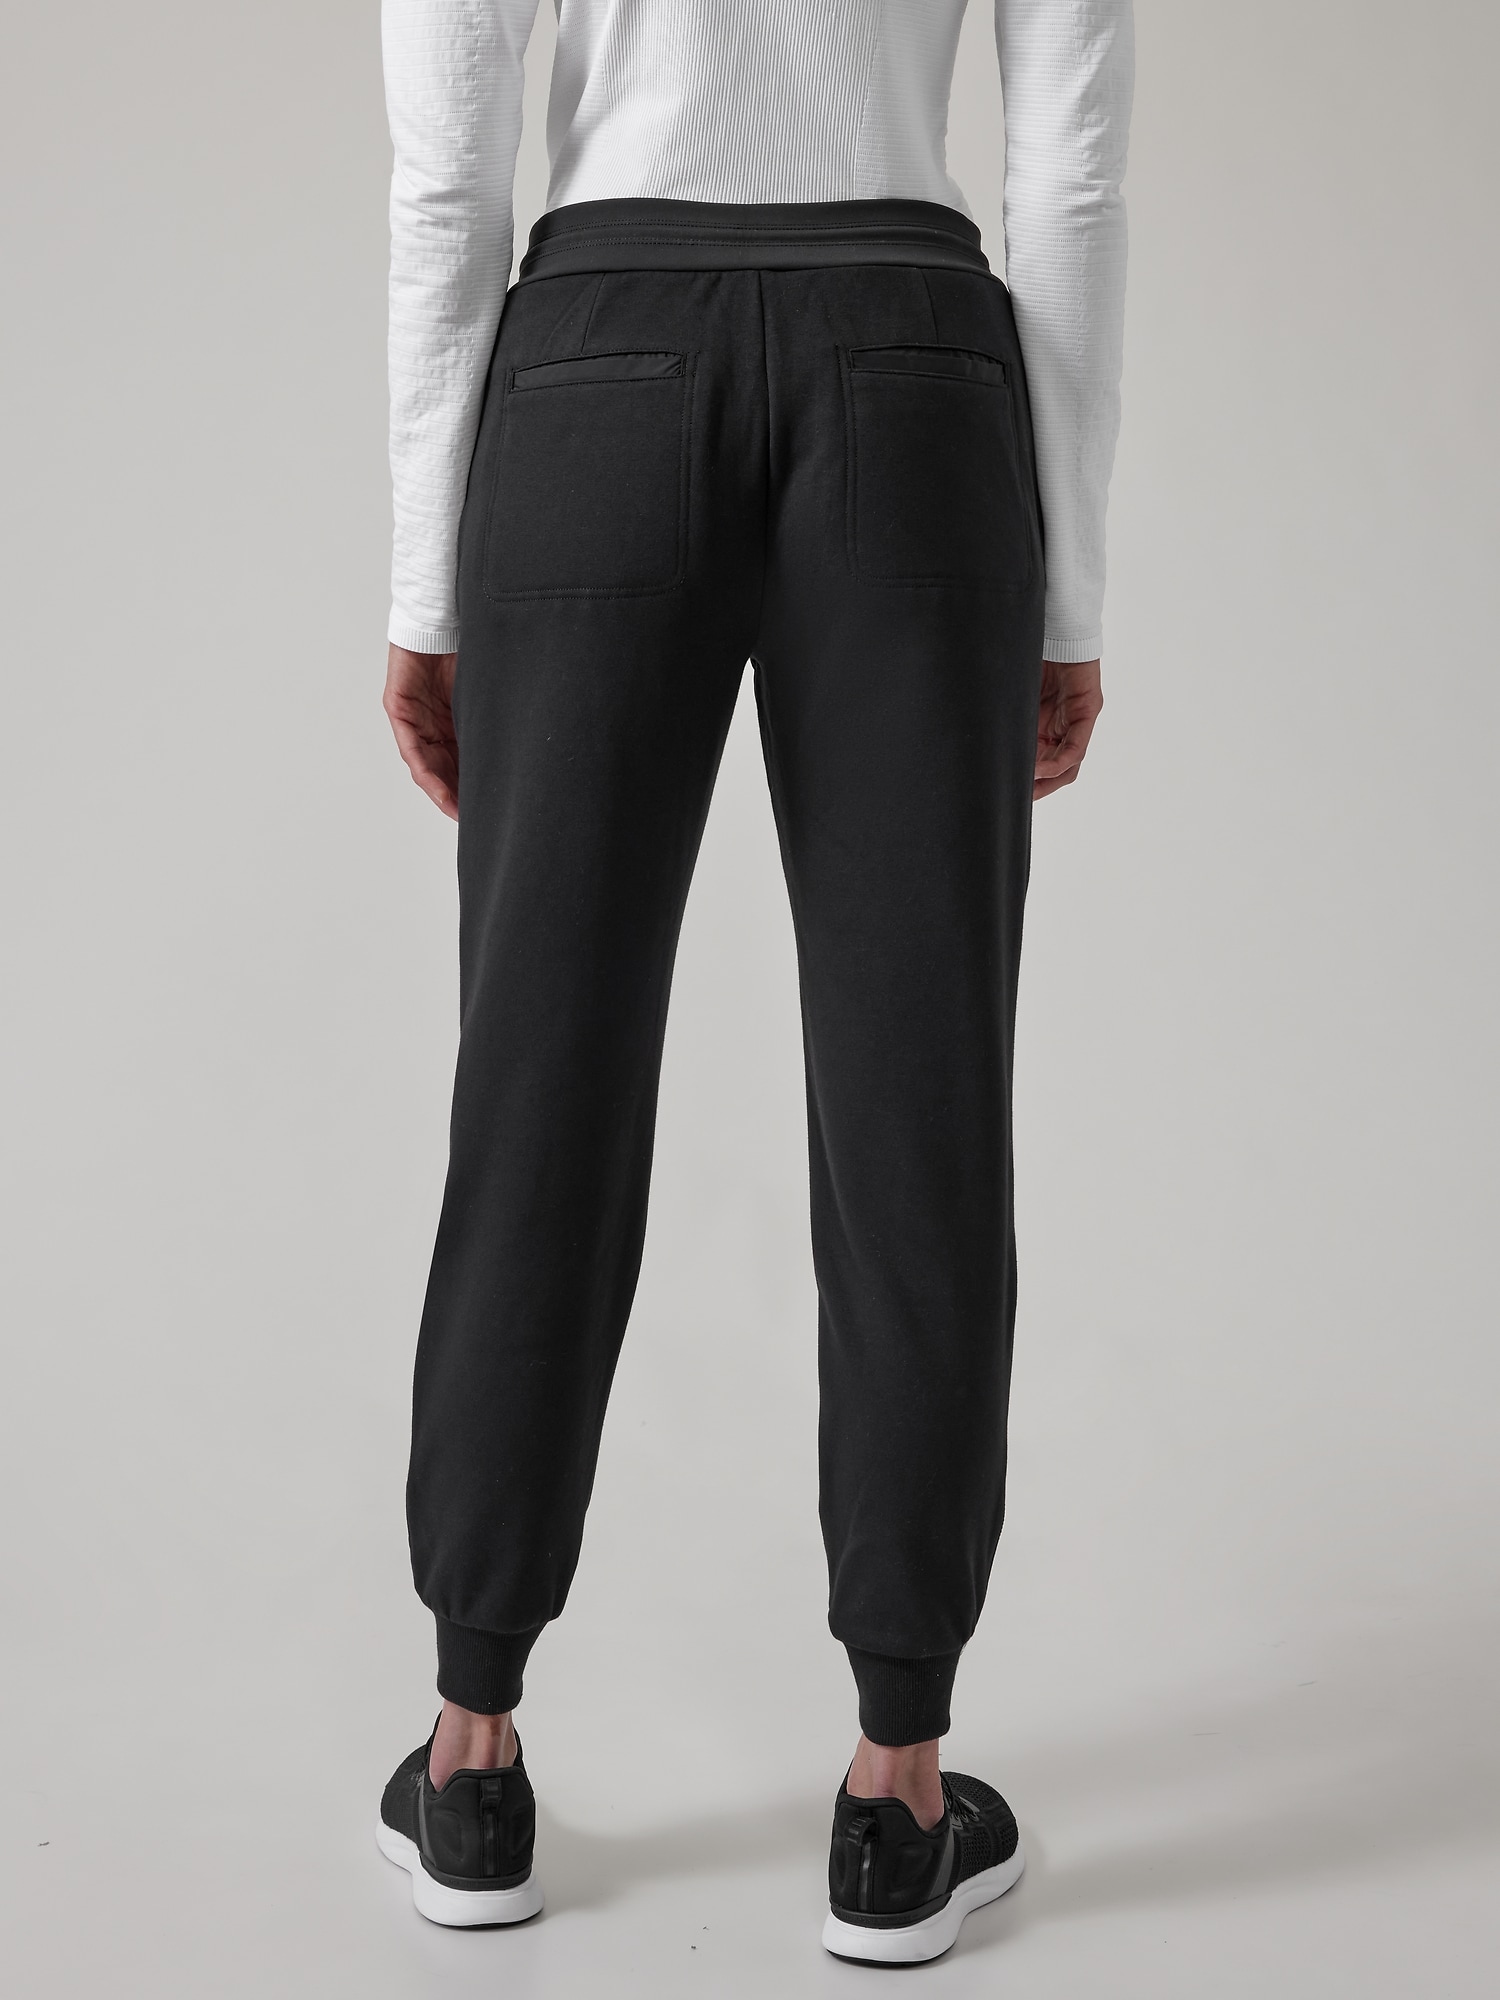 Lululemon Rulu Jogger size 20 Black brand new with tag, Women's